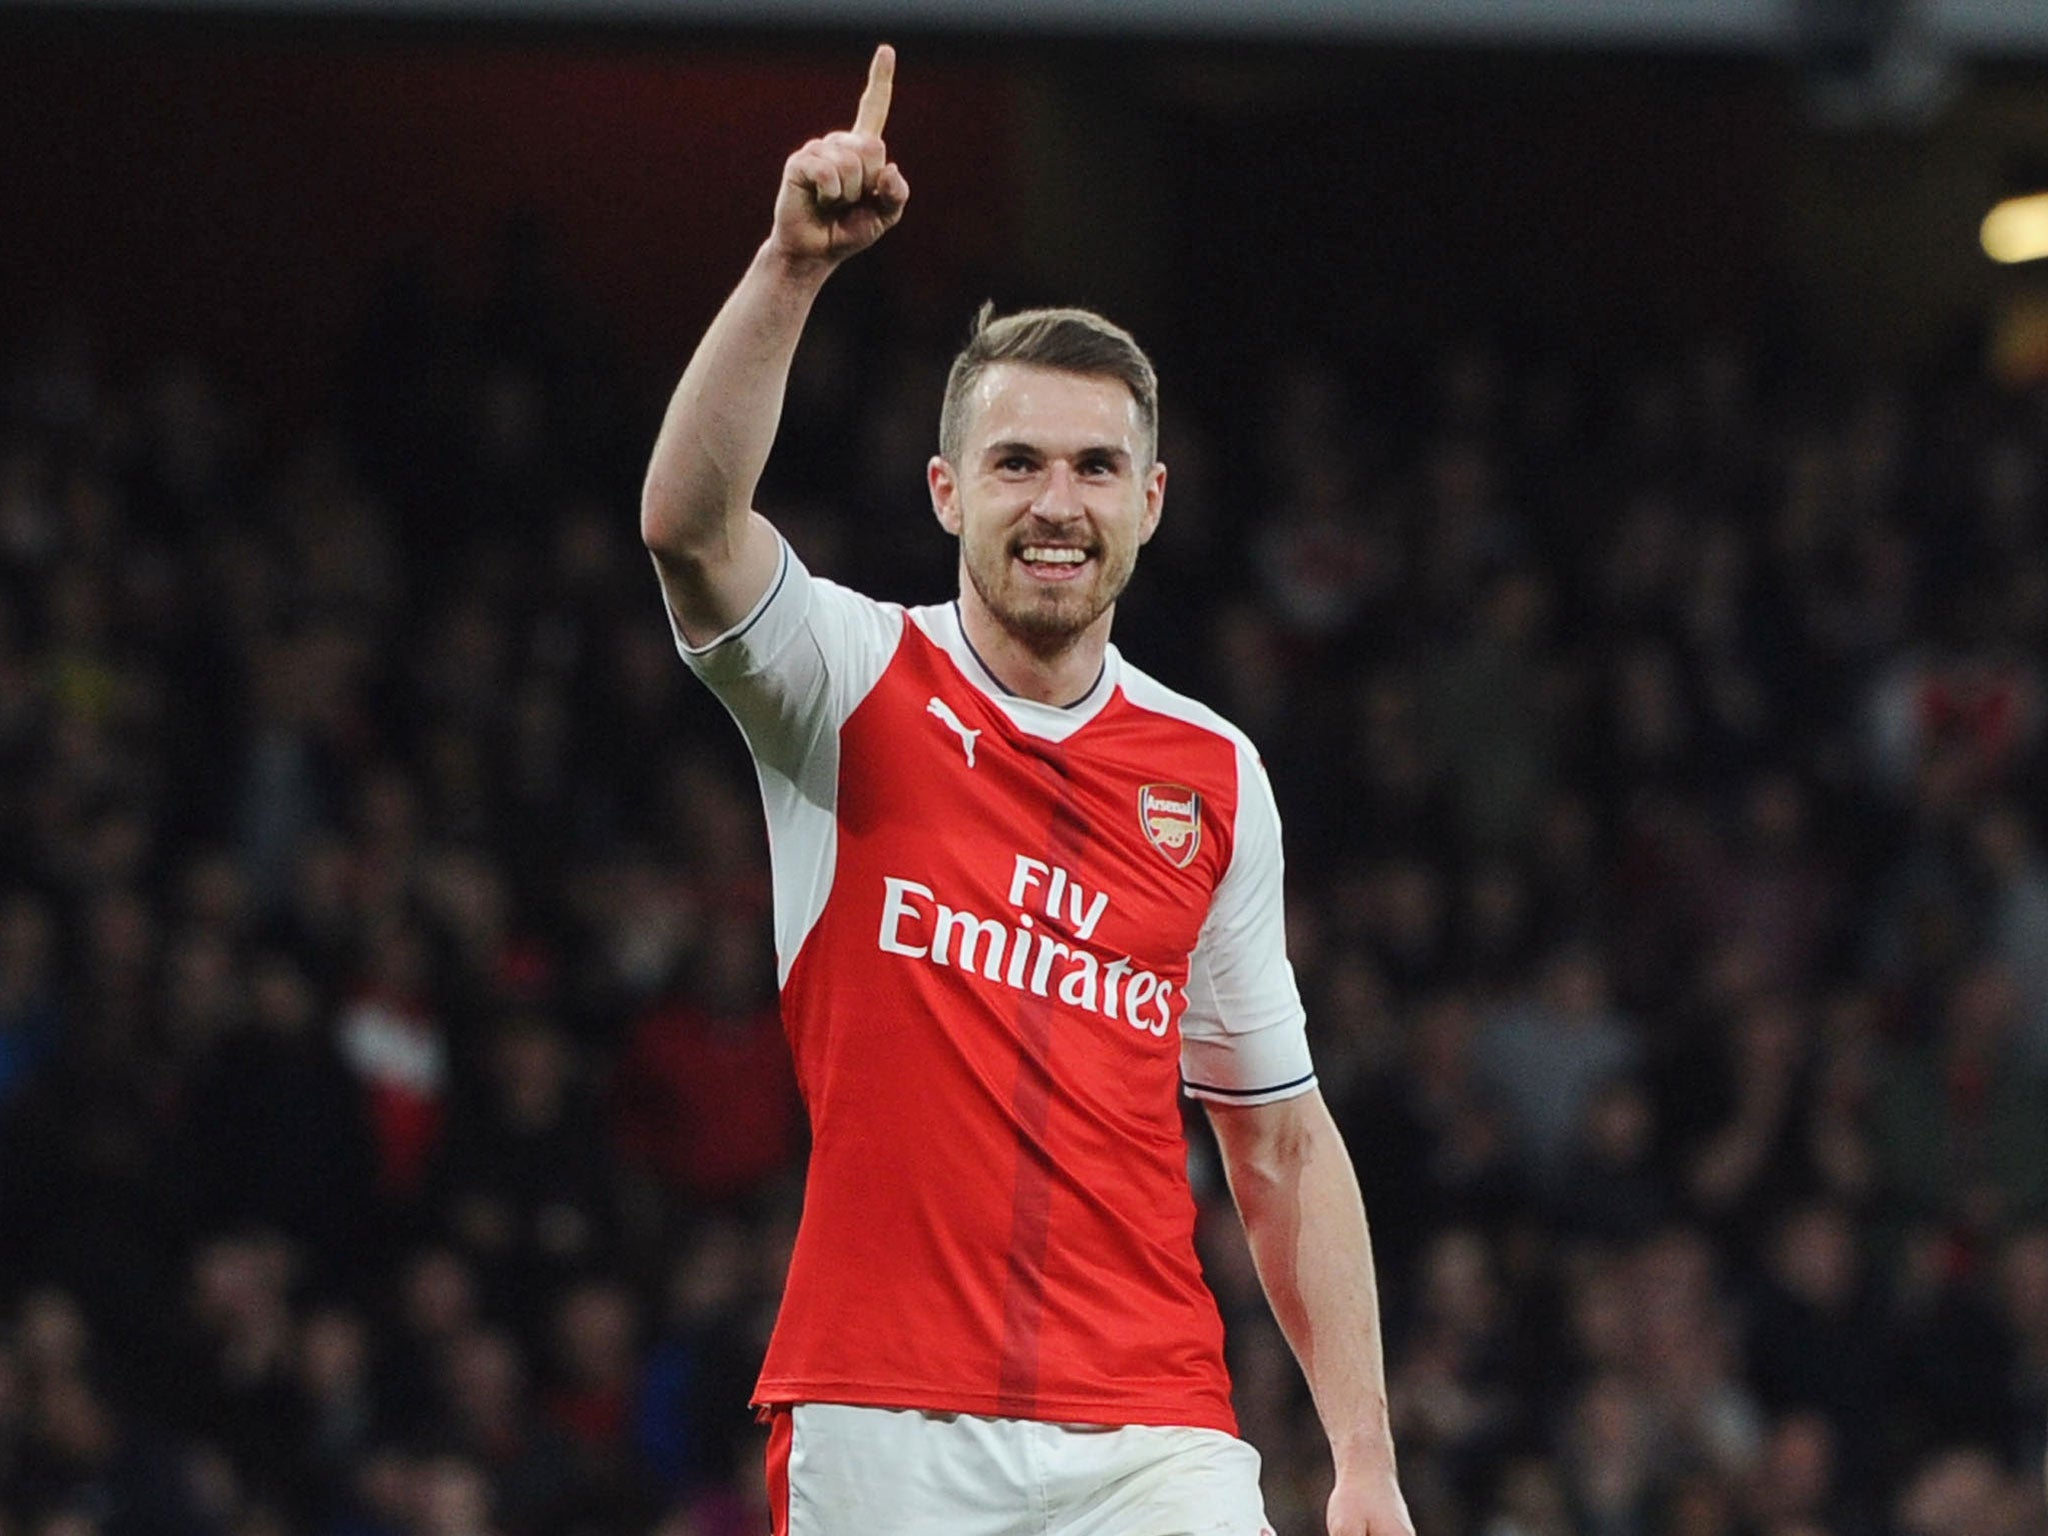 Aaron Ramsey believes Arsenal's progression to the FA Cup semi-finals is a 'big boost' for the club